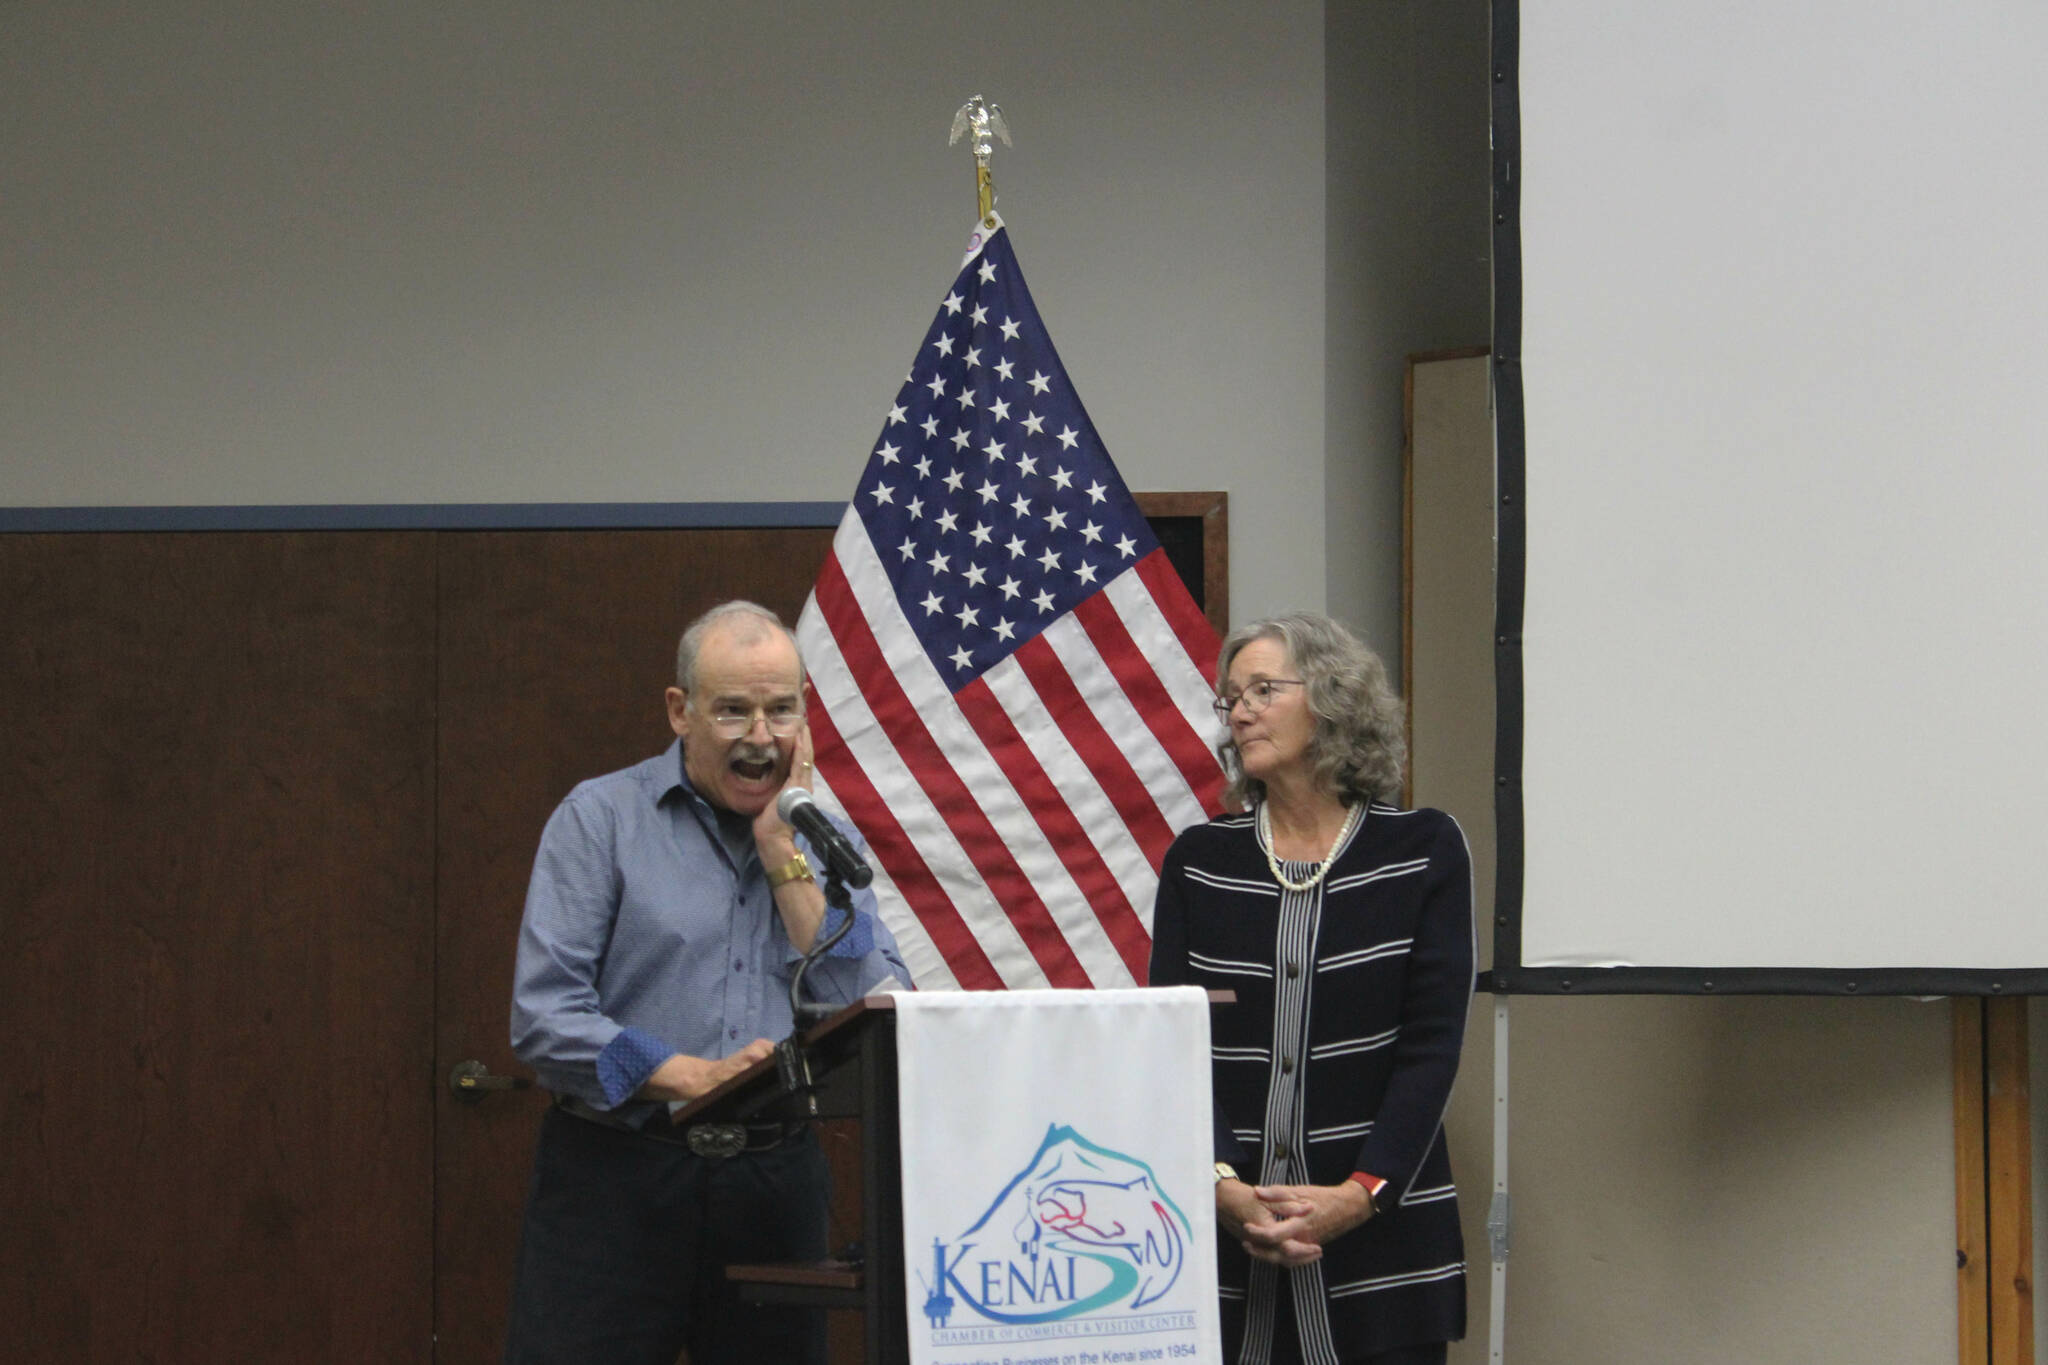 Bob Bird (left) and Lisa Parker (right) participate in a Constitutional Convention Forum at the Kenai Chamber of Commerce and Visitor Center on Wednesday, Oct. 12, 2022 in Kenai, Alaska. (Ashlyn O'Hara/Peninsula Clarion)